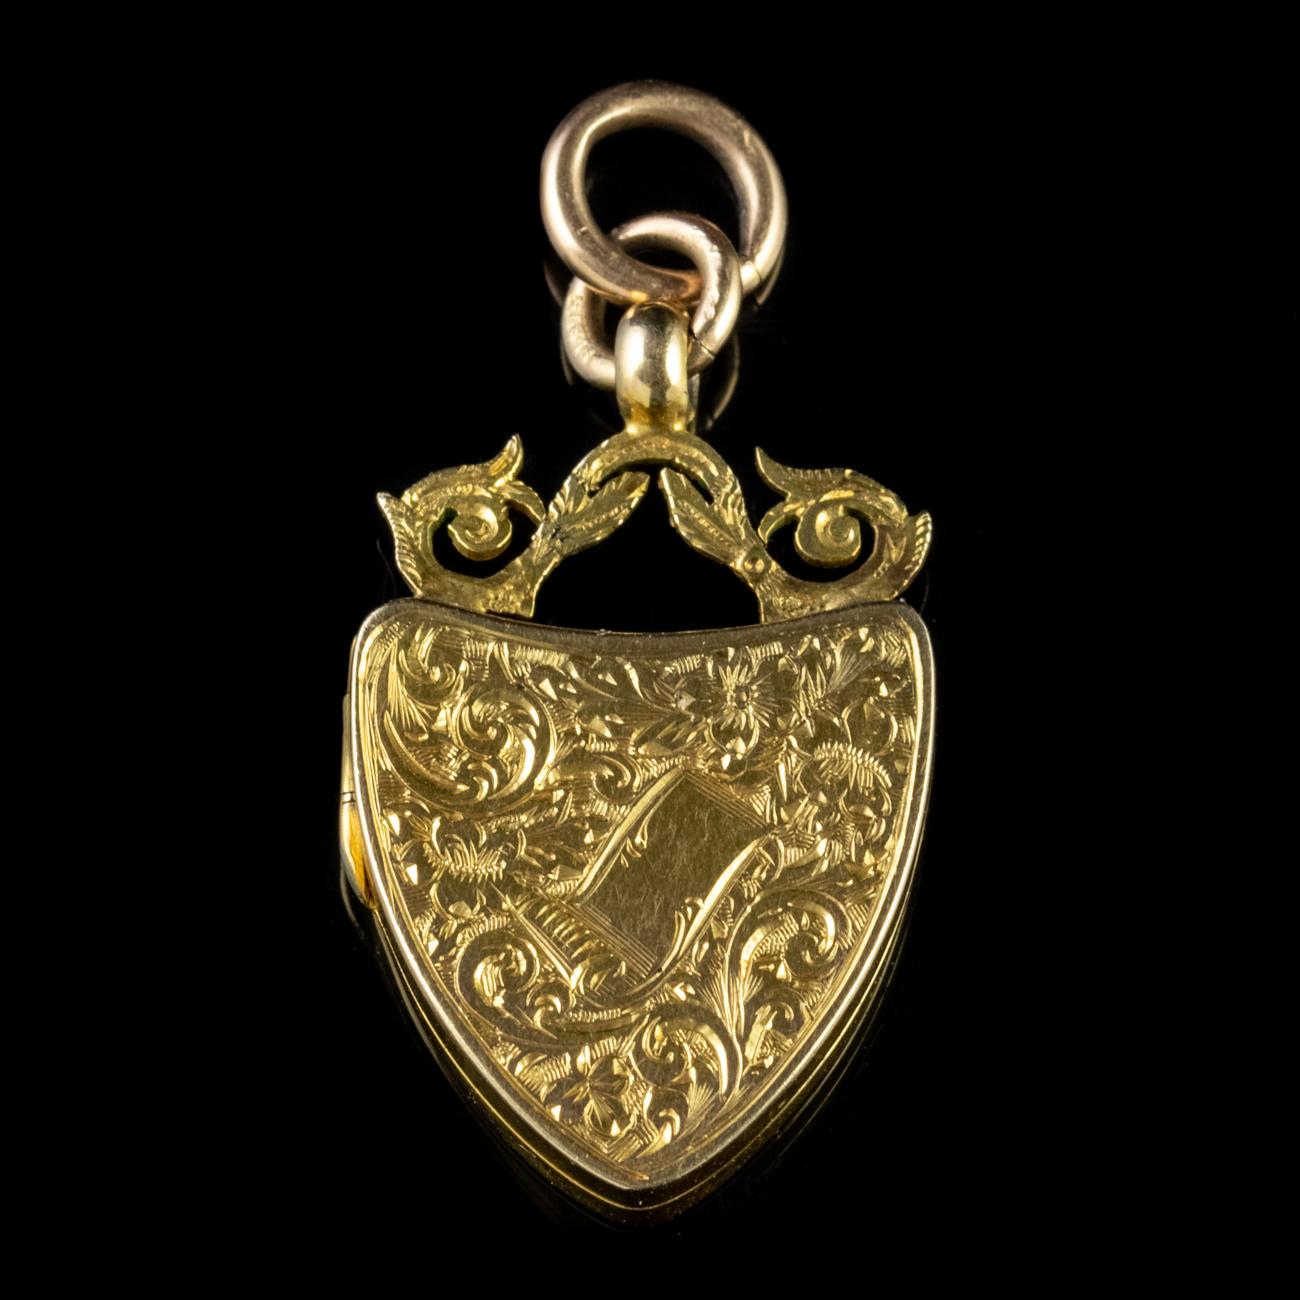 An elegant Antique Edwardian shield shaped locket fashioned in 9ct Yellow Gold and engraved with forget-Me-Nots.

Forget me nots in an old German tale were discovered by two lovers walking by a river one day. After picking a beautiful bouquet of